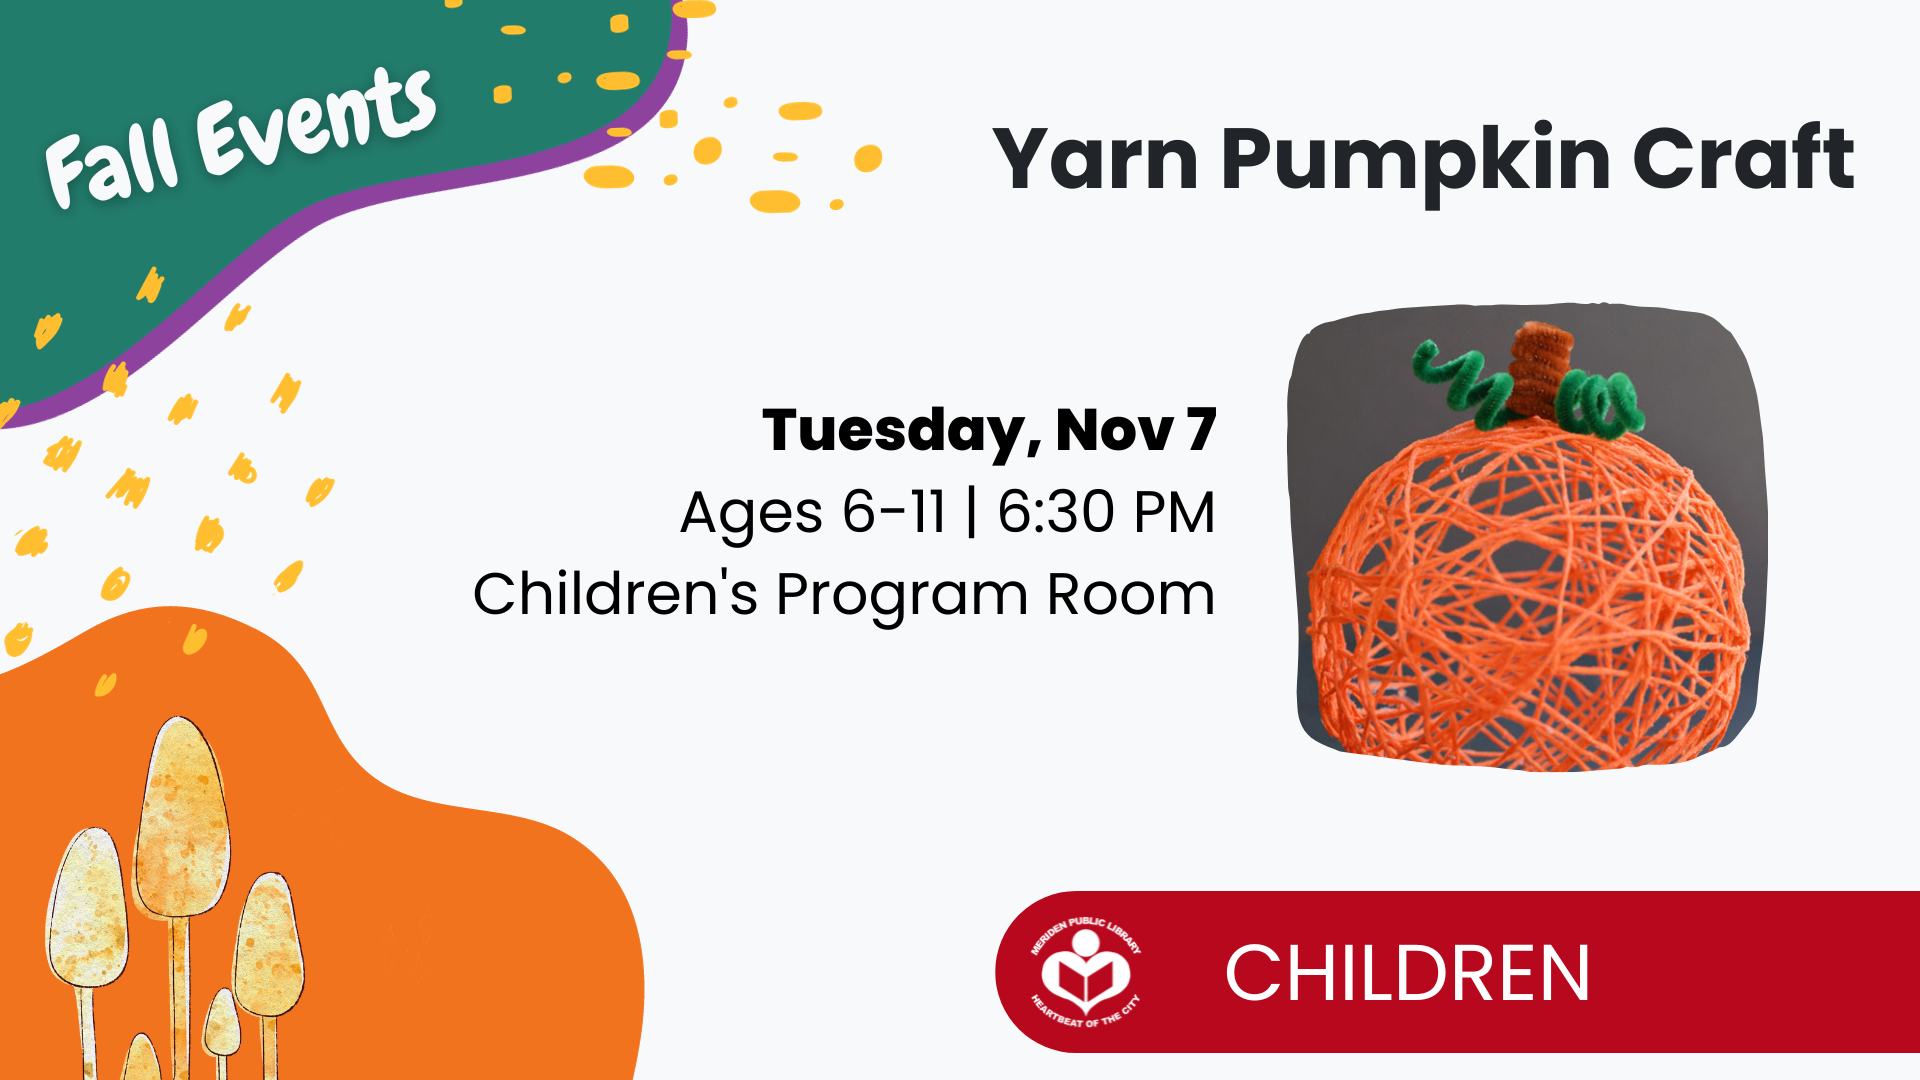 Yarn pumpkin craft shown with MPL colors and doodles